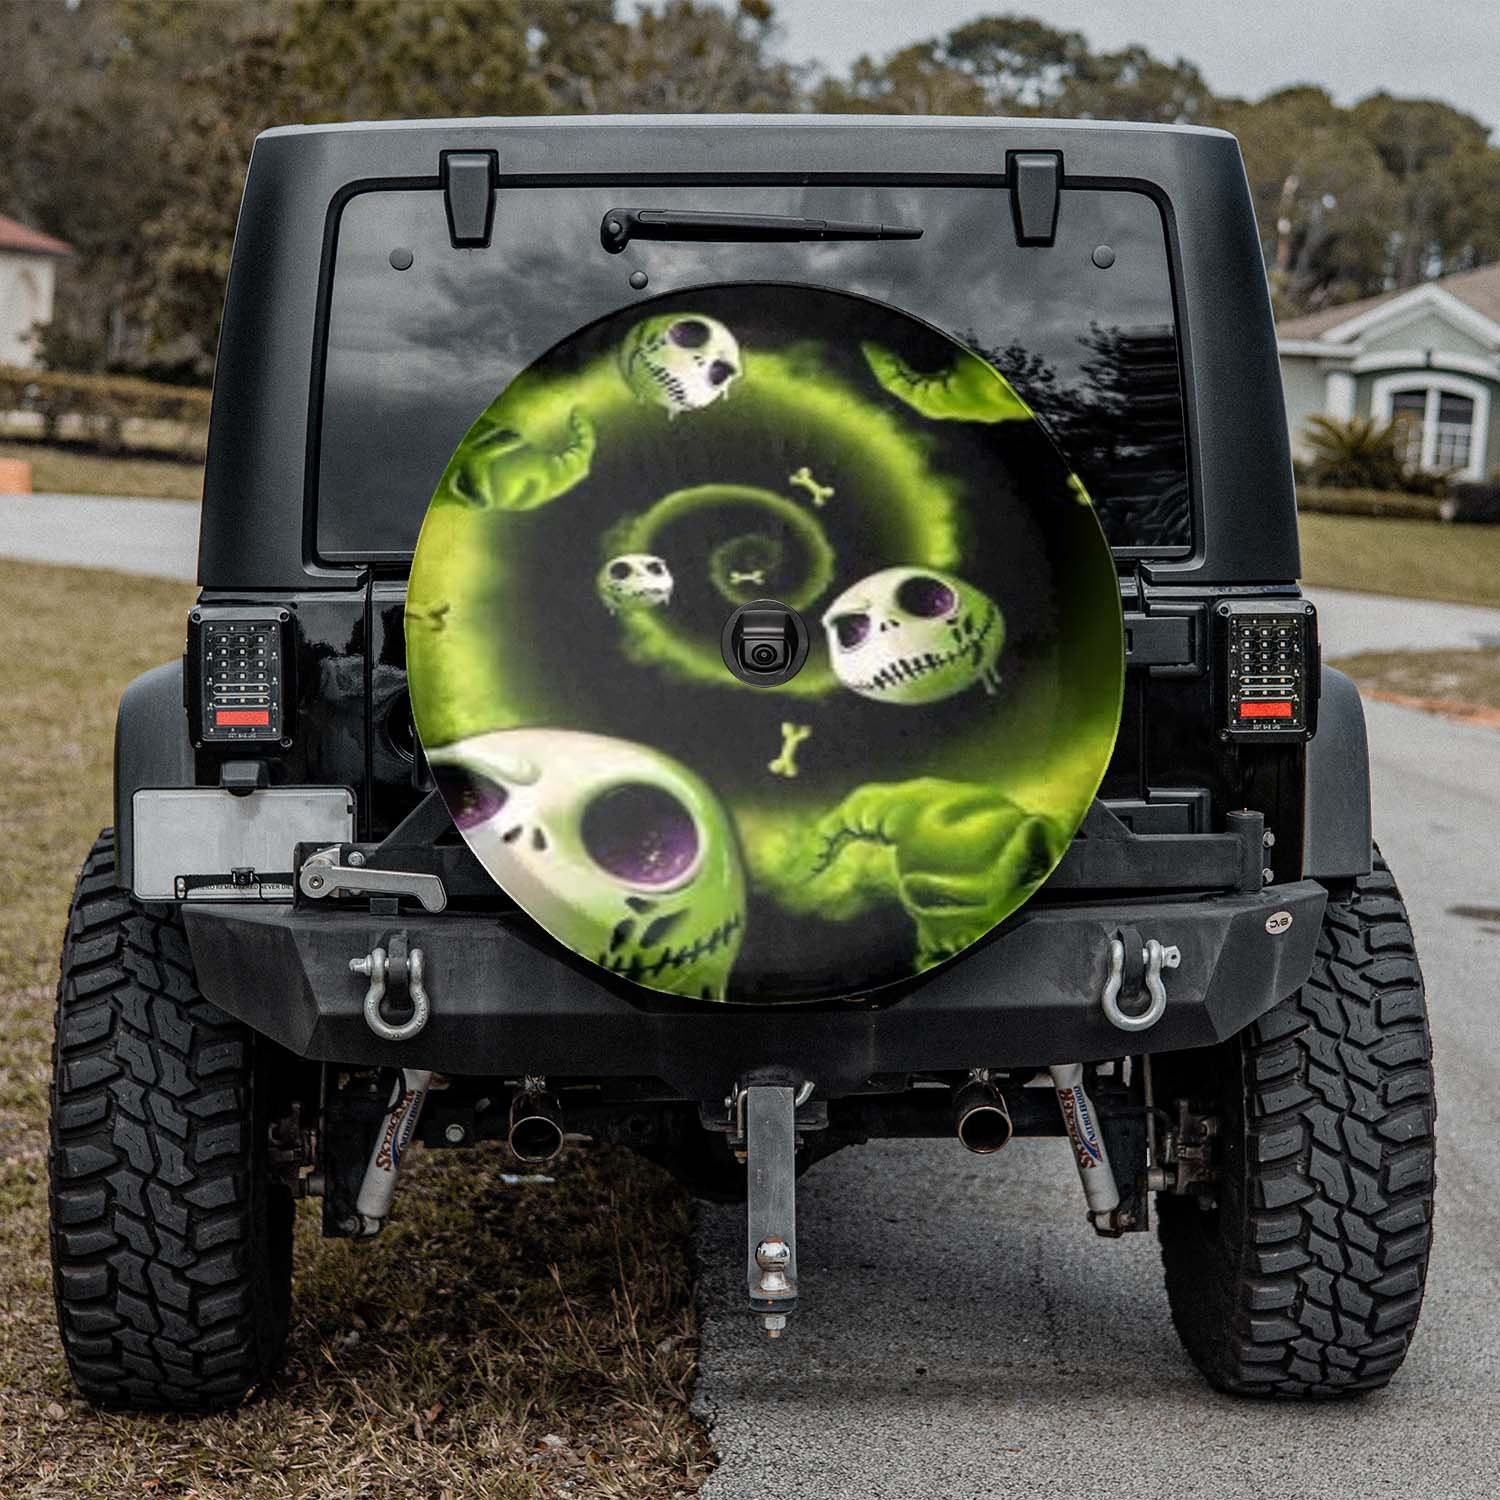 The Nightmare Oogie Boogie Pumkin Halloween Spare Tire Cover